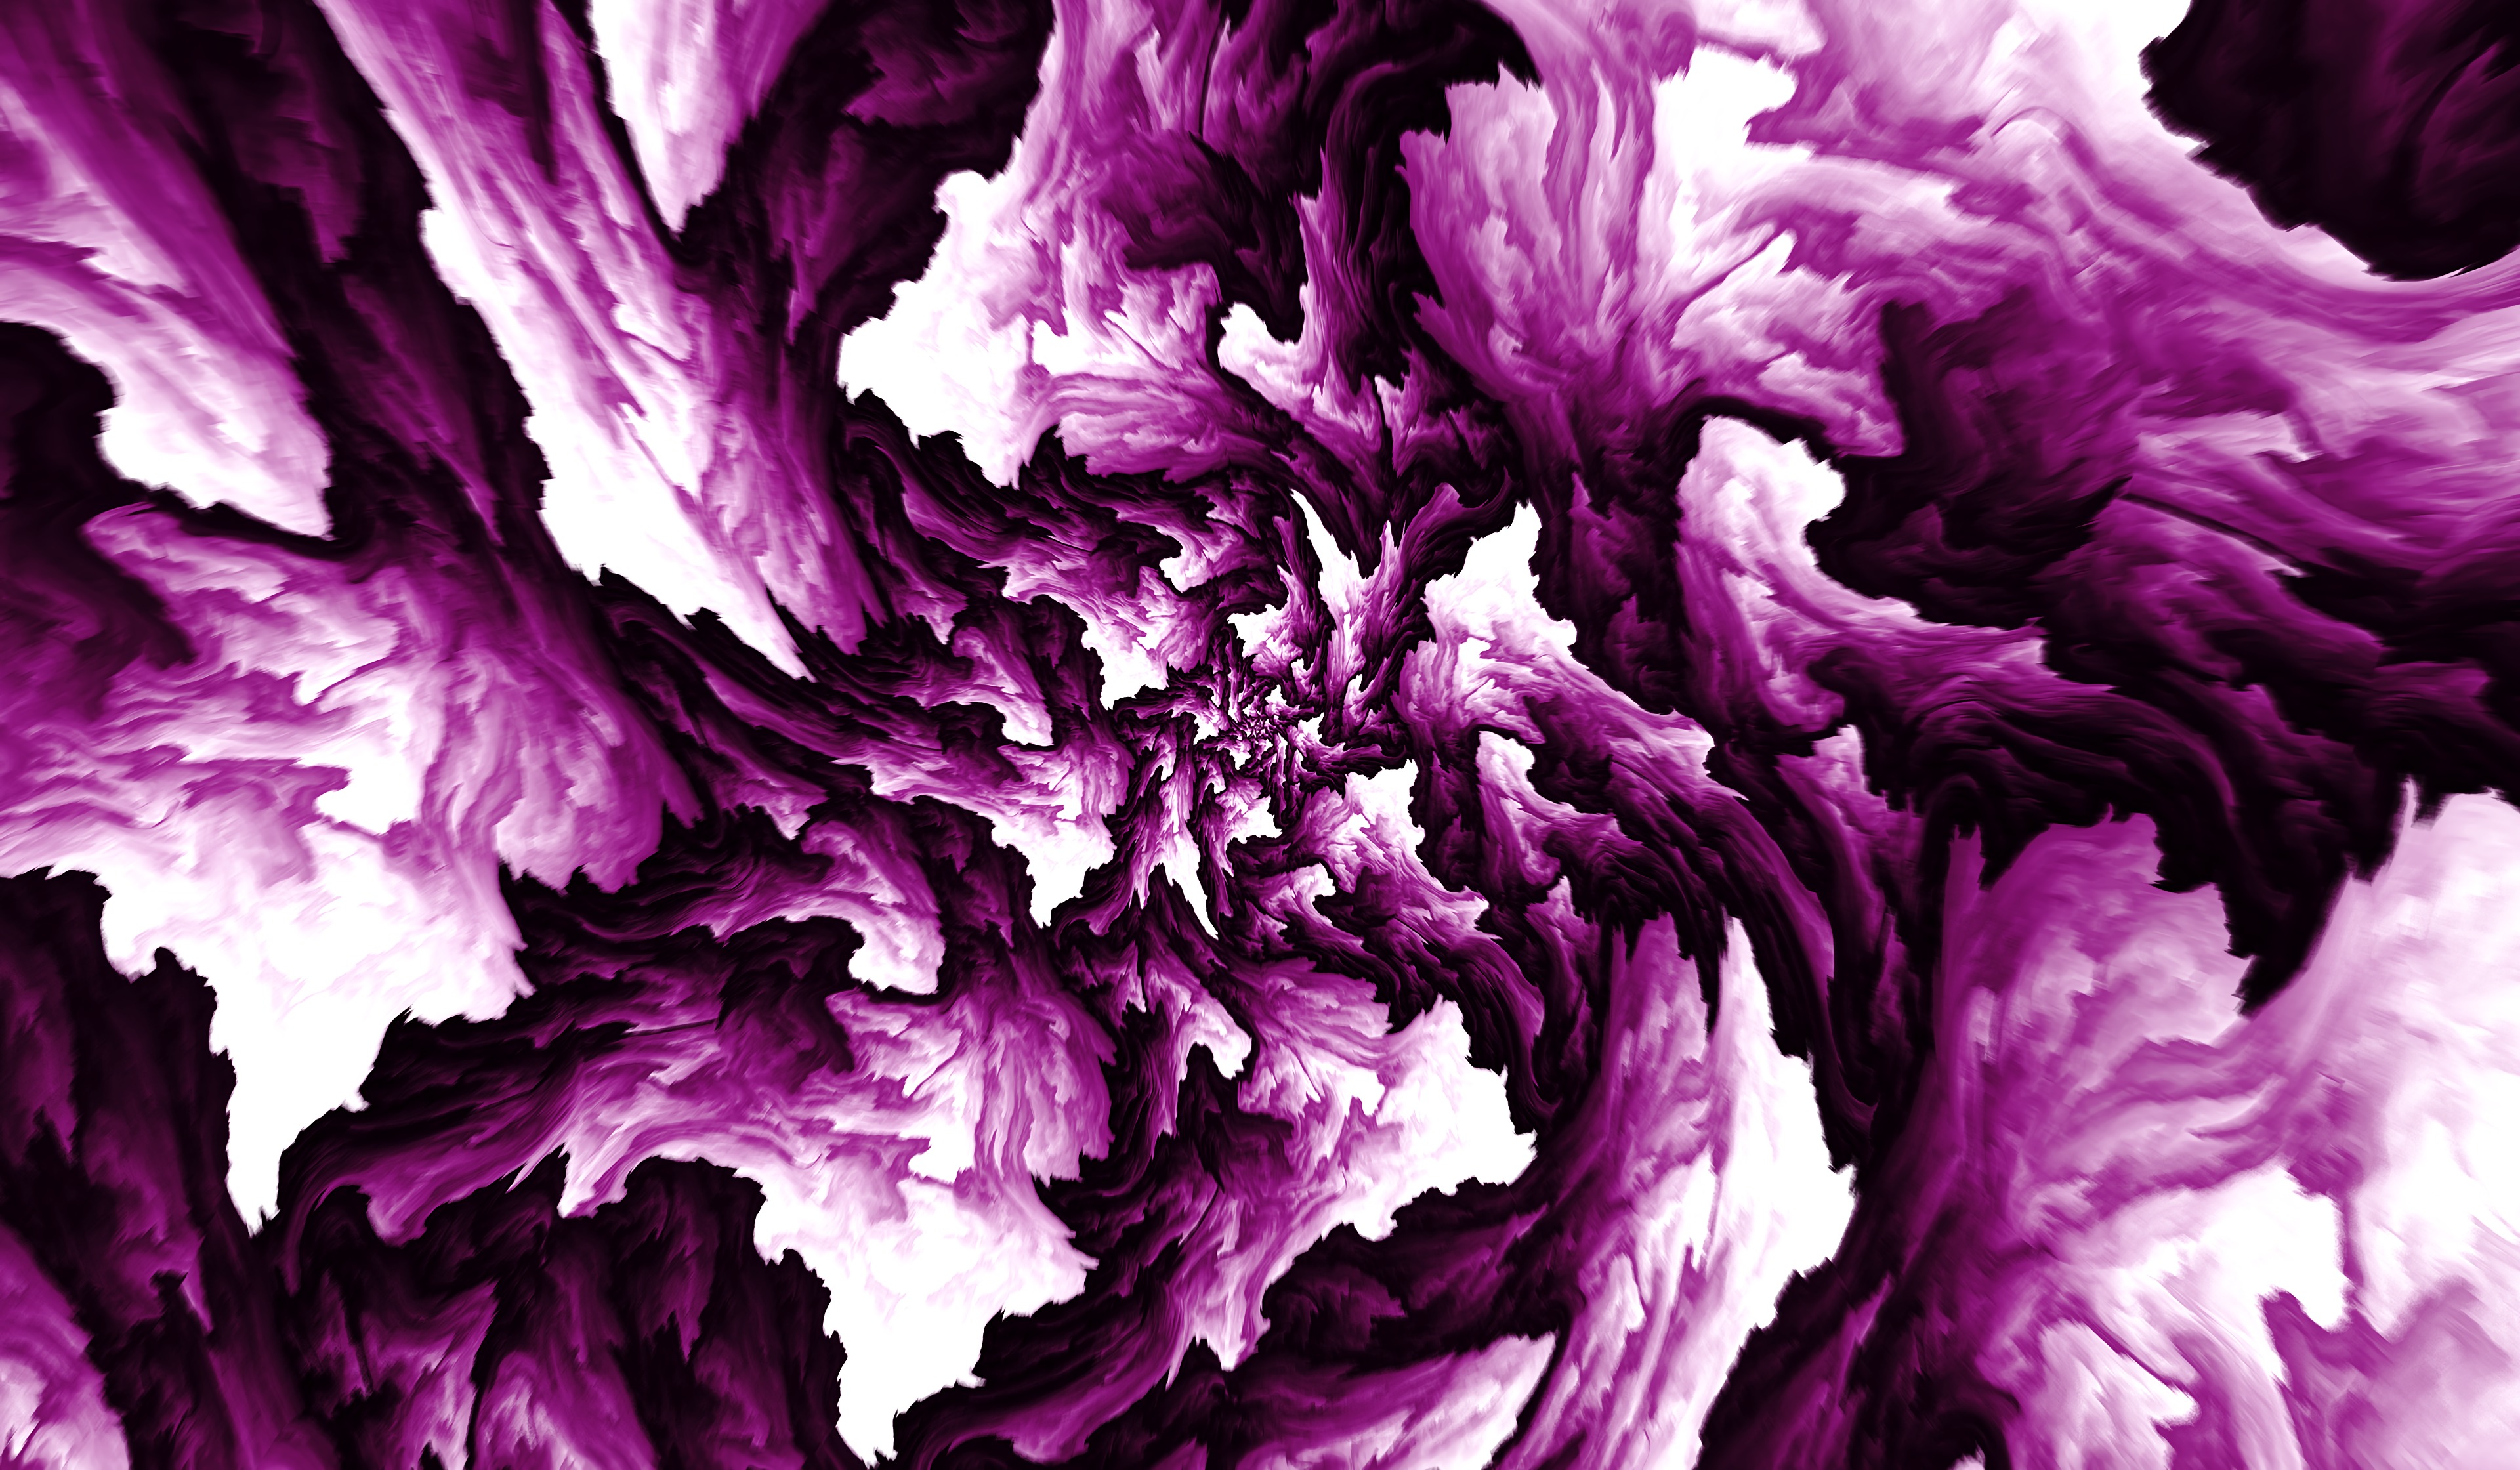 violet, abstract, fractal, stains, spots, purple, confused, intricate 32K